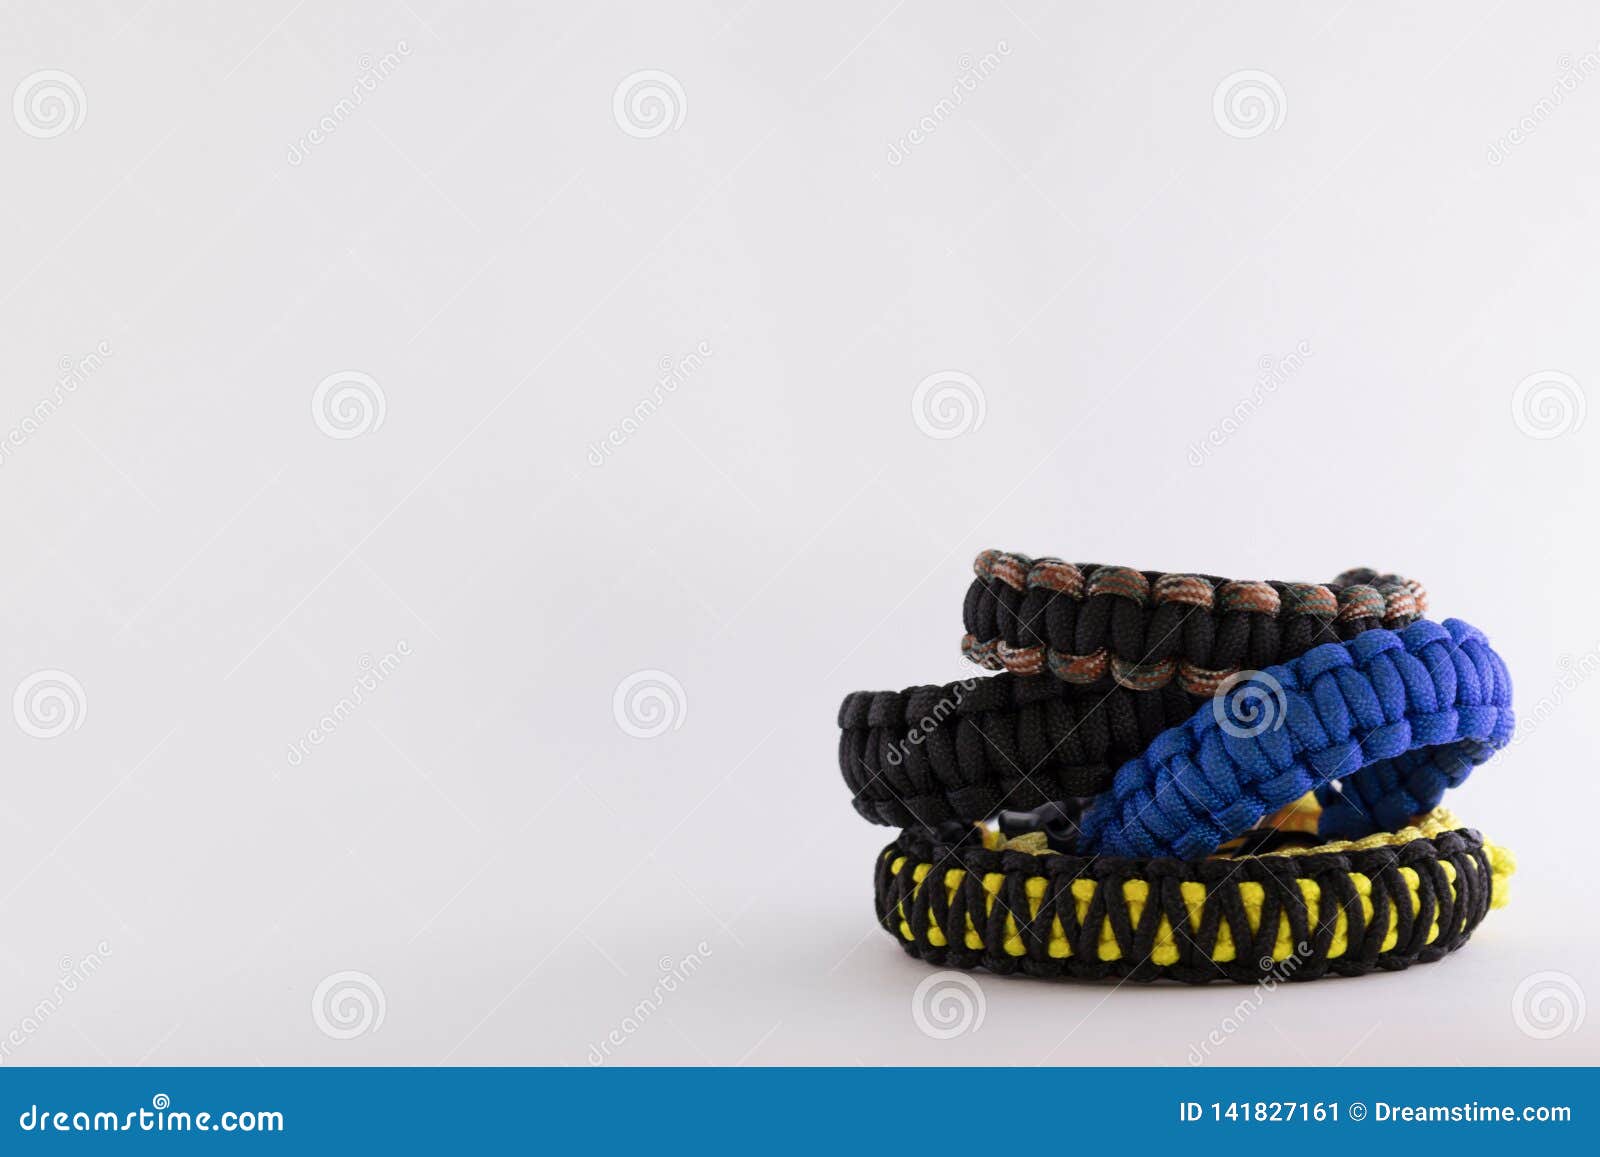 Pile of Paracord Bracelets on a Blank White Background Stock Image - Image  of braid, camouflage: 141827161